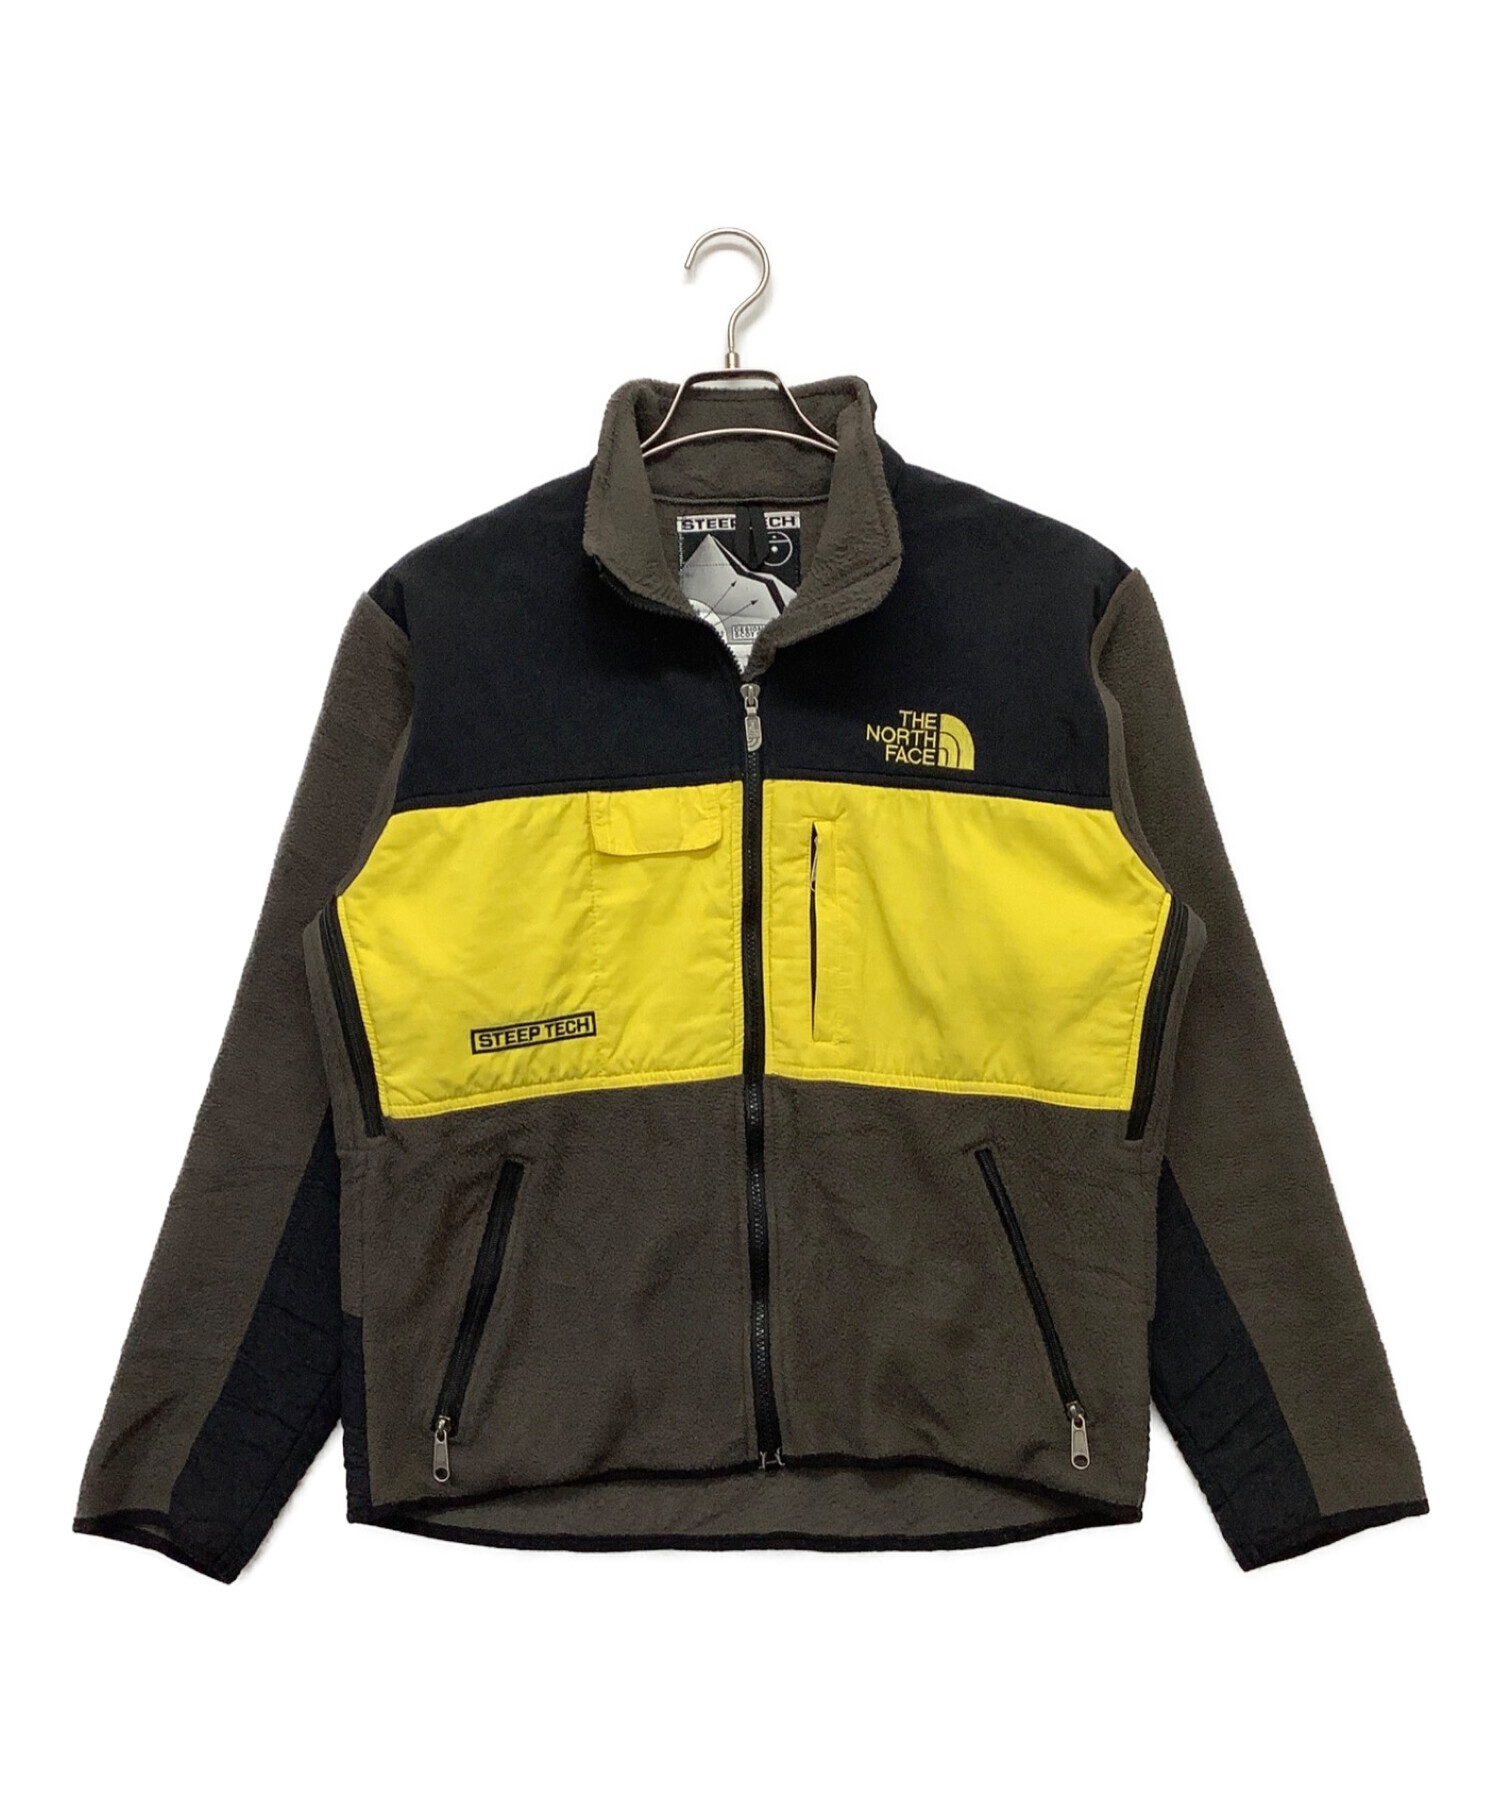 THE NORTH FACE　STEEP TECHデナリジャケット肩幅48